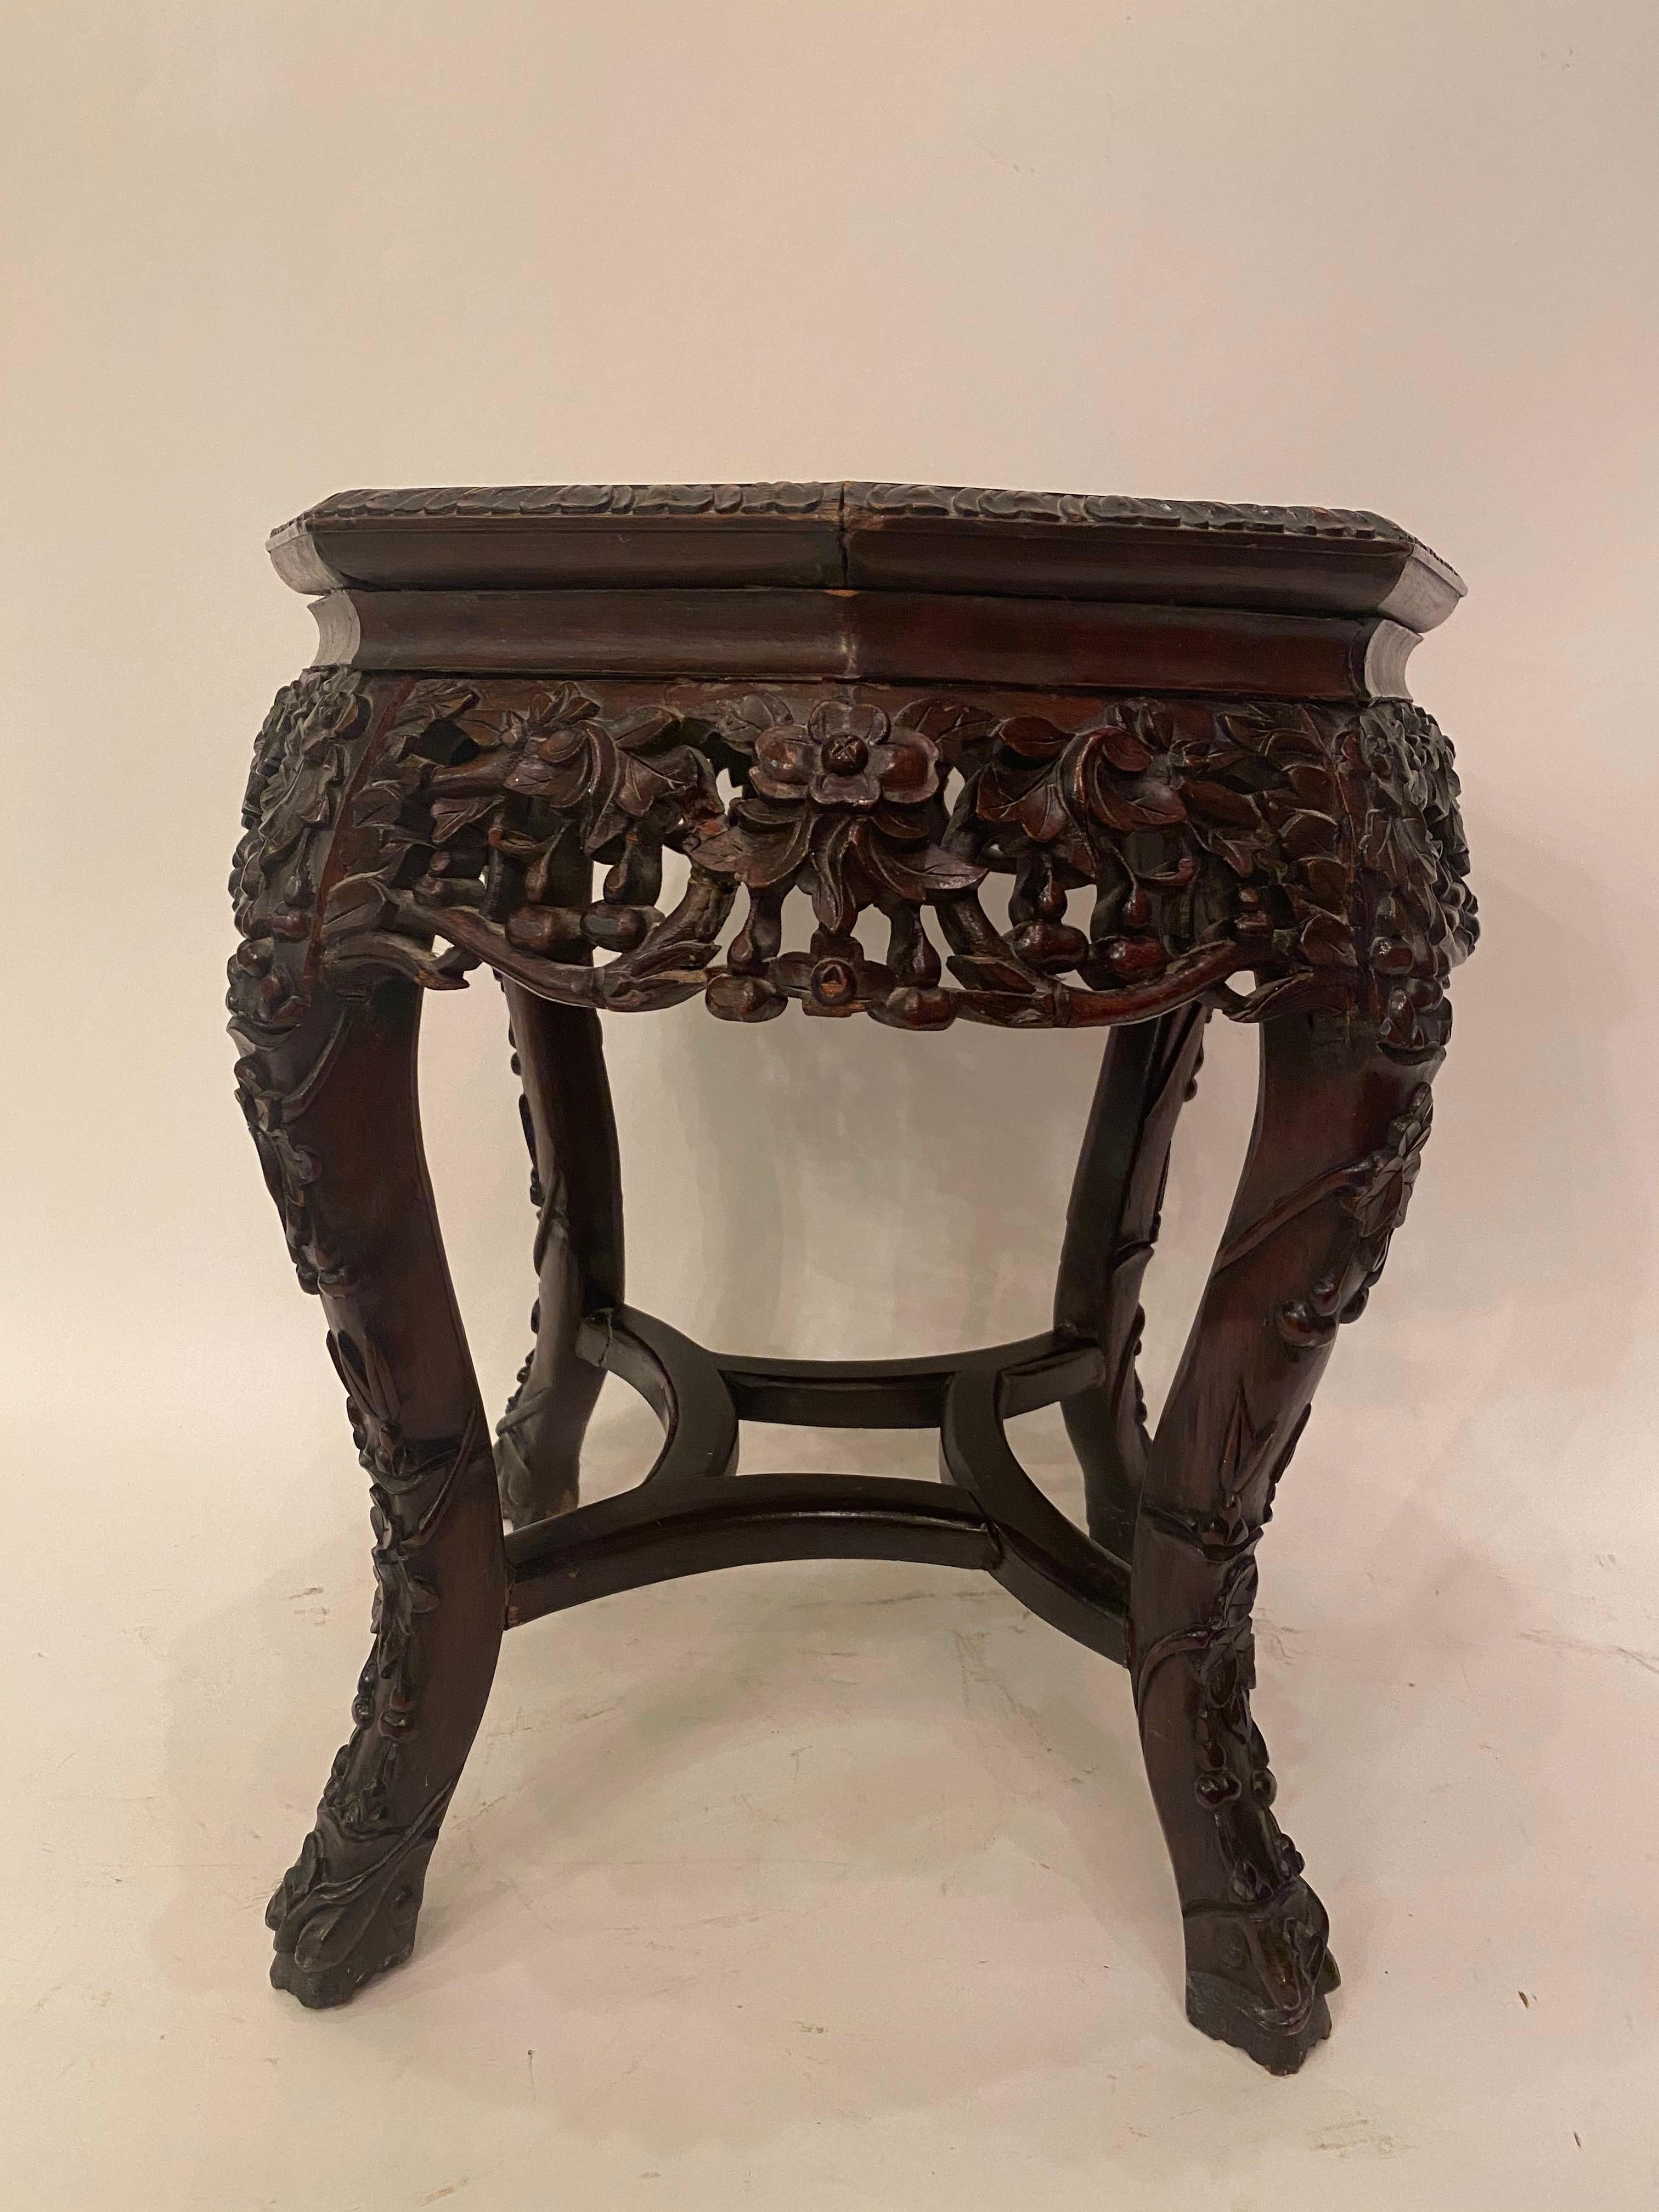 Antique Chinese hardwood carved flowers stands with 8 sides octagonal marble top insert, 19th century. Measures: H 18.625”, D 16.5”.